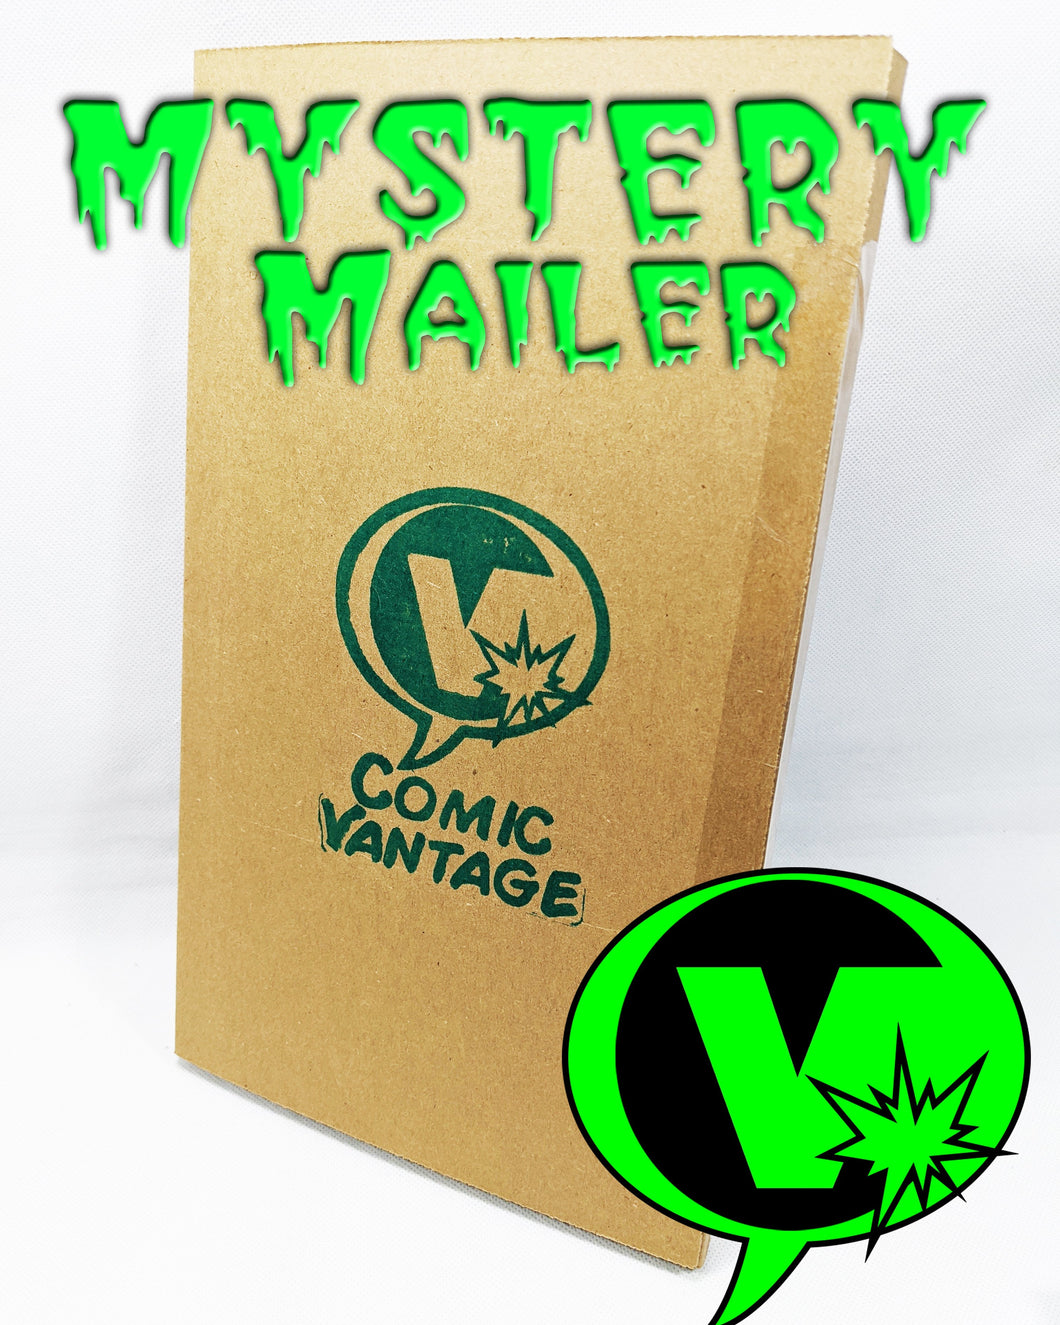 The One and Only Comic Vantage Mystery Mailer Box Season 33